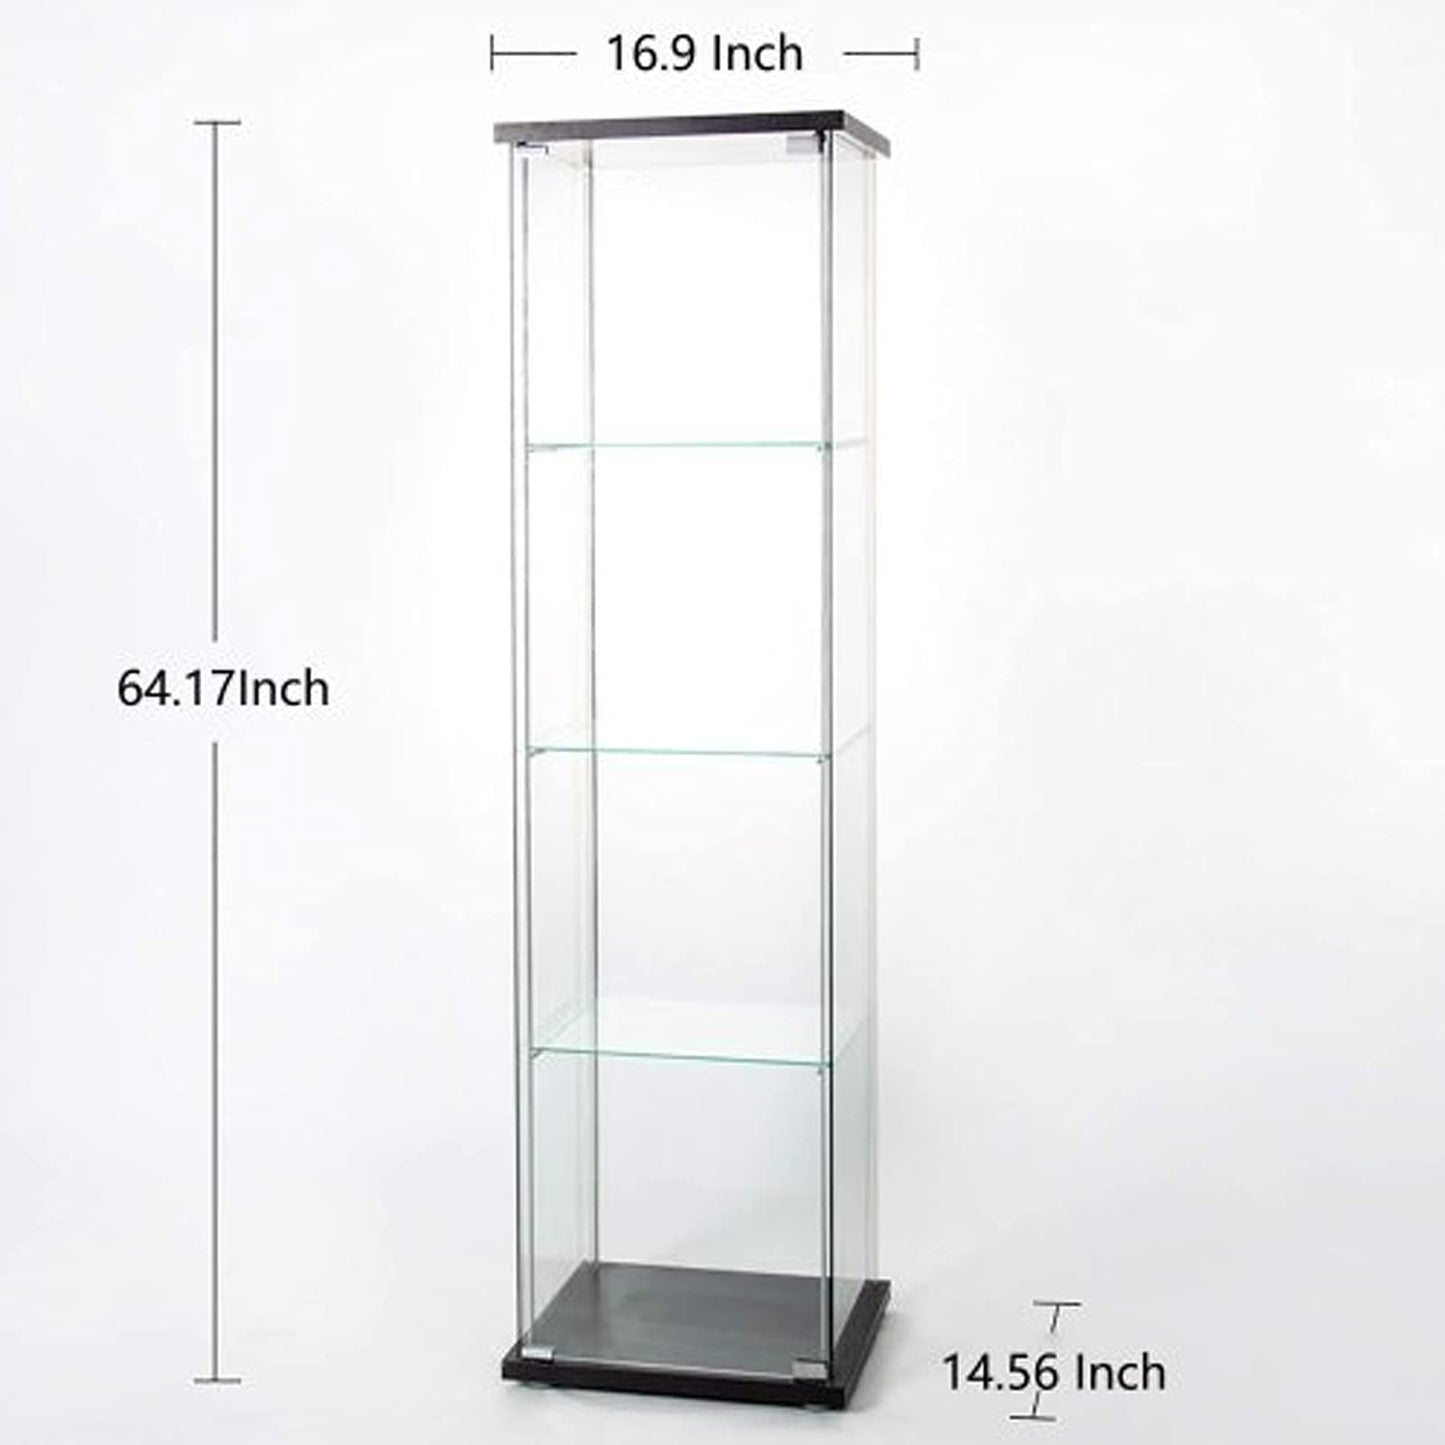 Zacis 4-Tier Glass Display Cabinet with Glass Door, 5mm Tempered Glass Curio Cabinet Collection Display Case, Floor Standing Glass Curio Cabinet